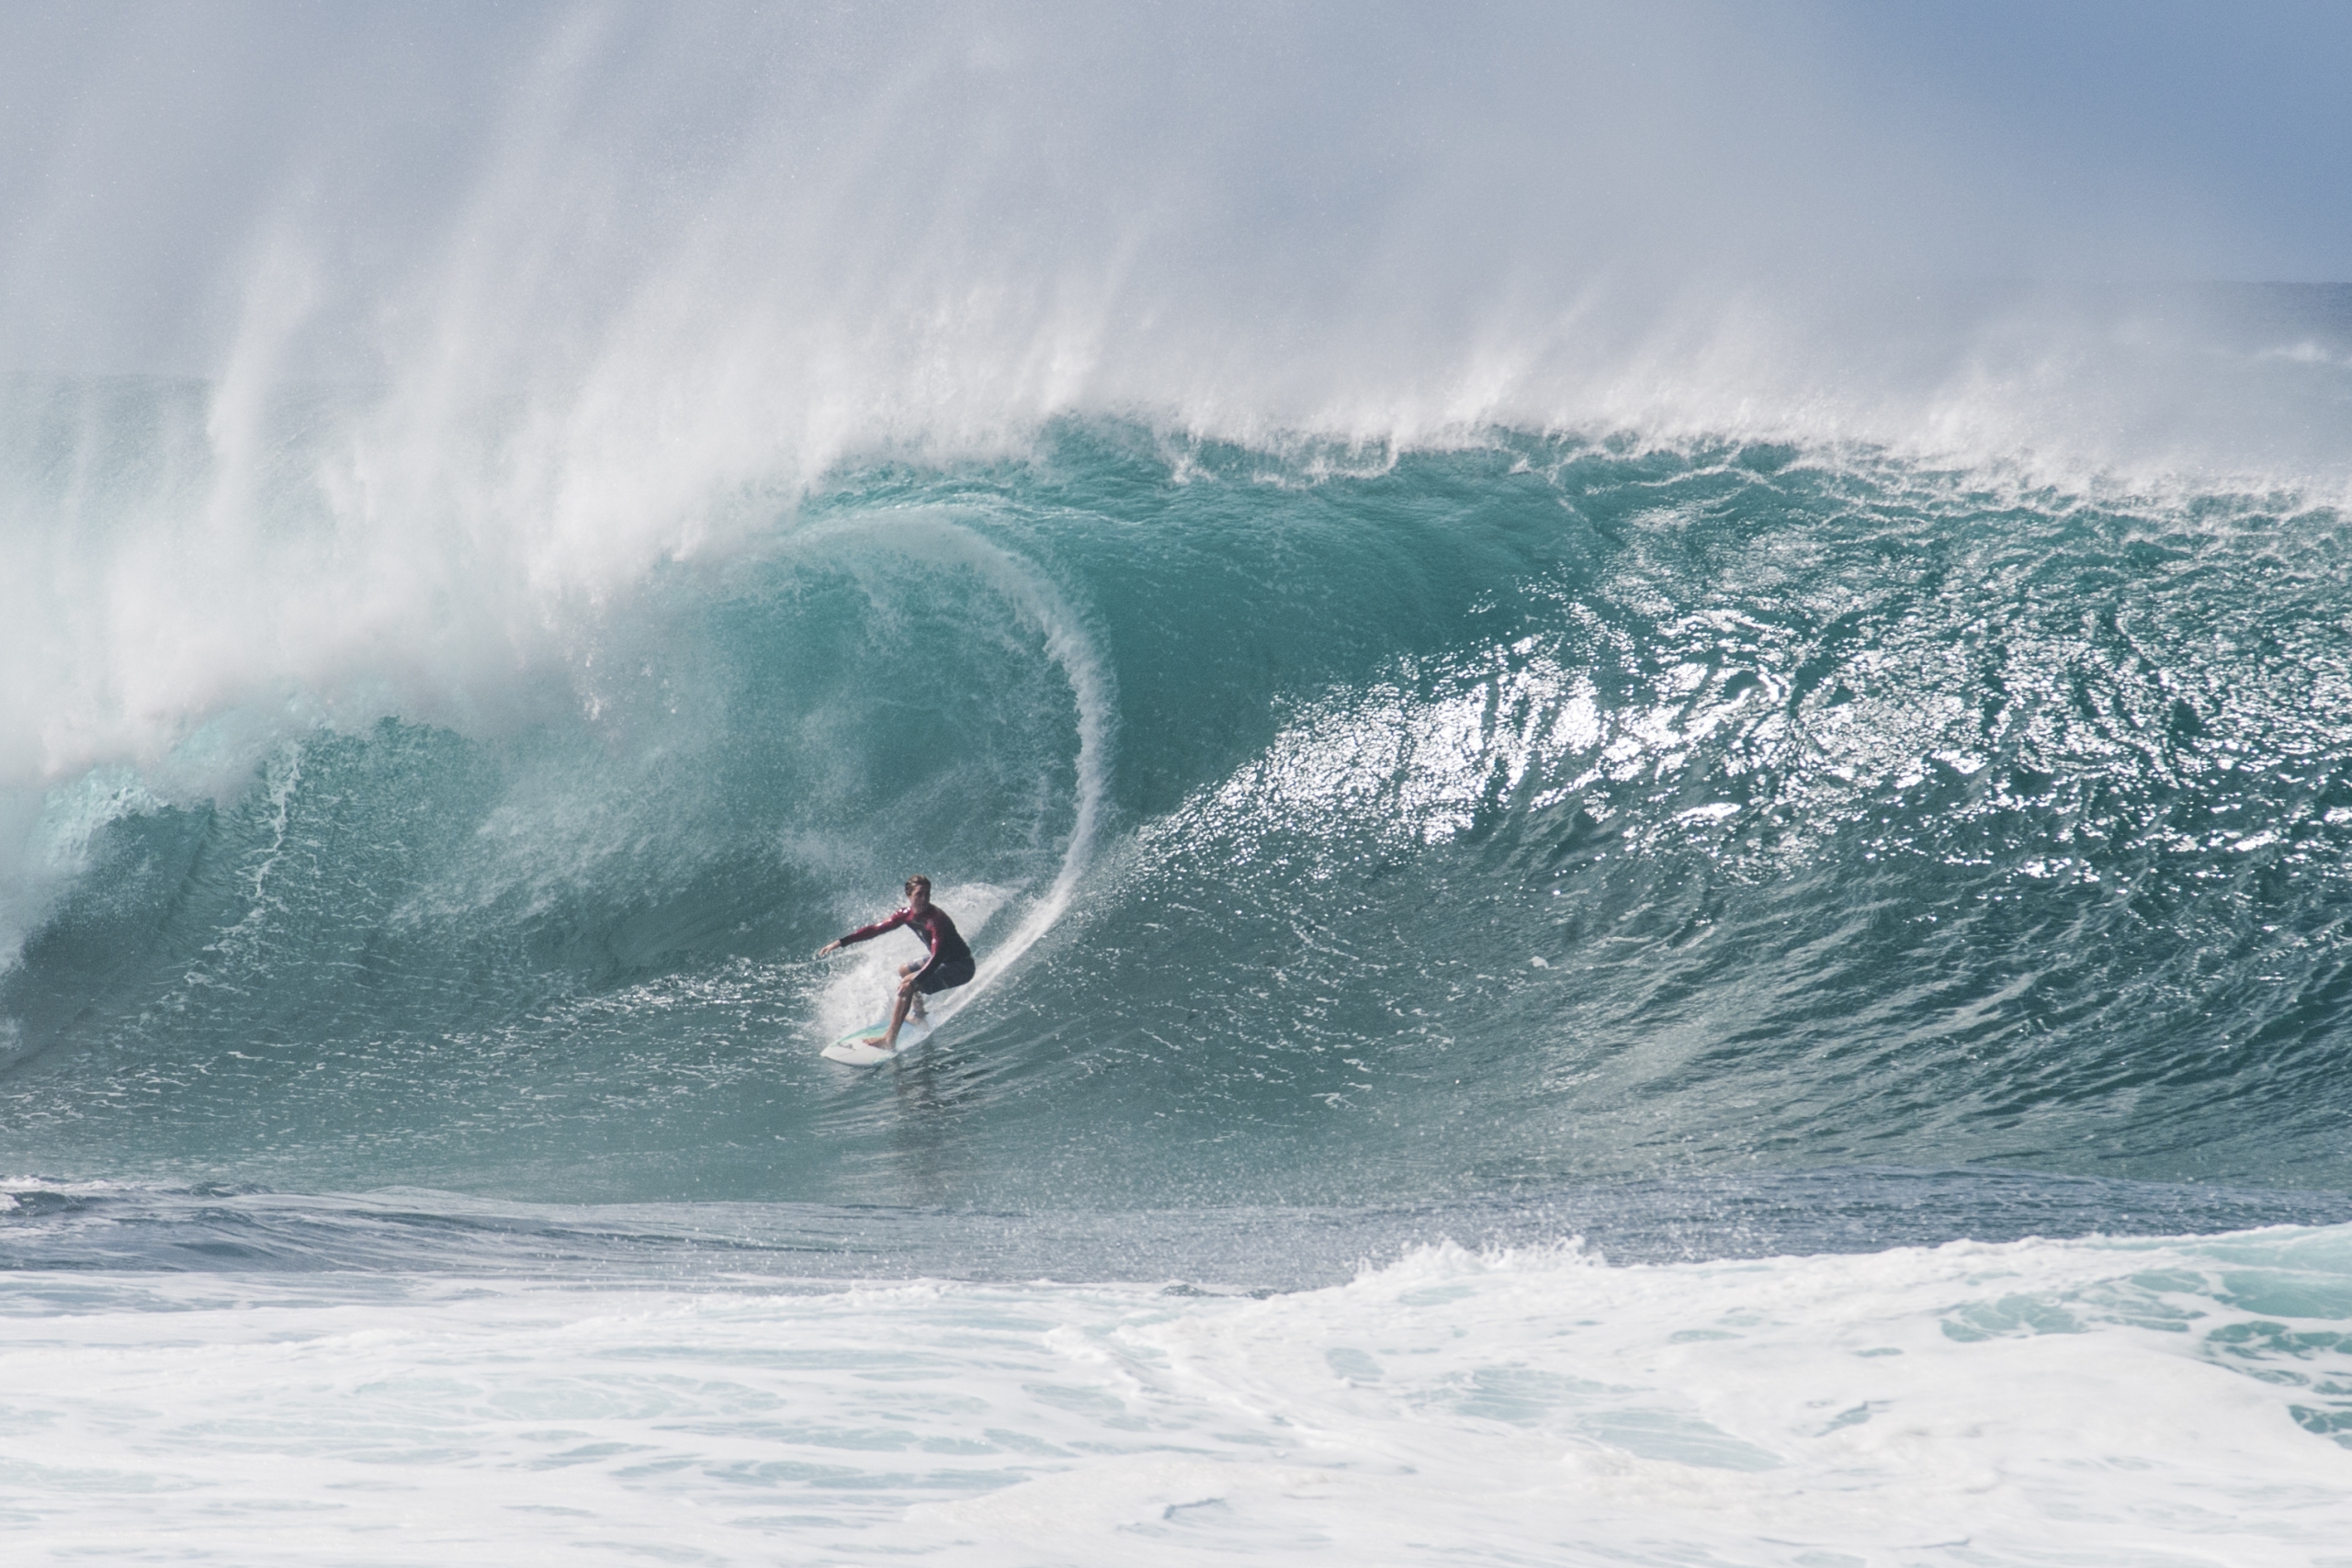 A surfer lines up a very large wave in Oahu